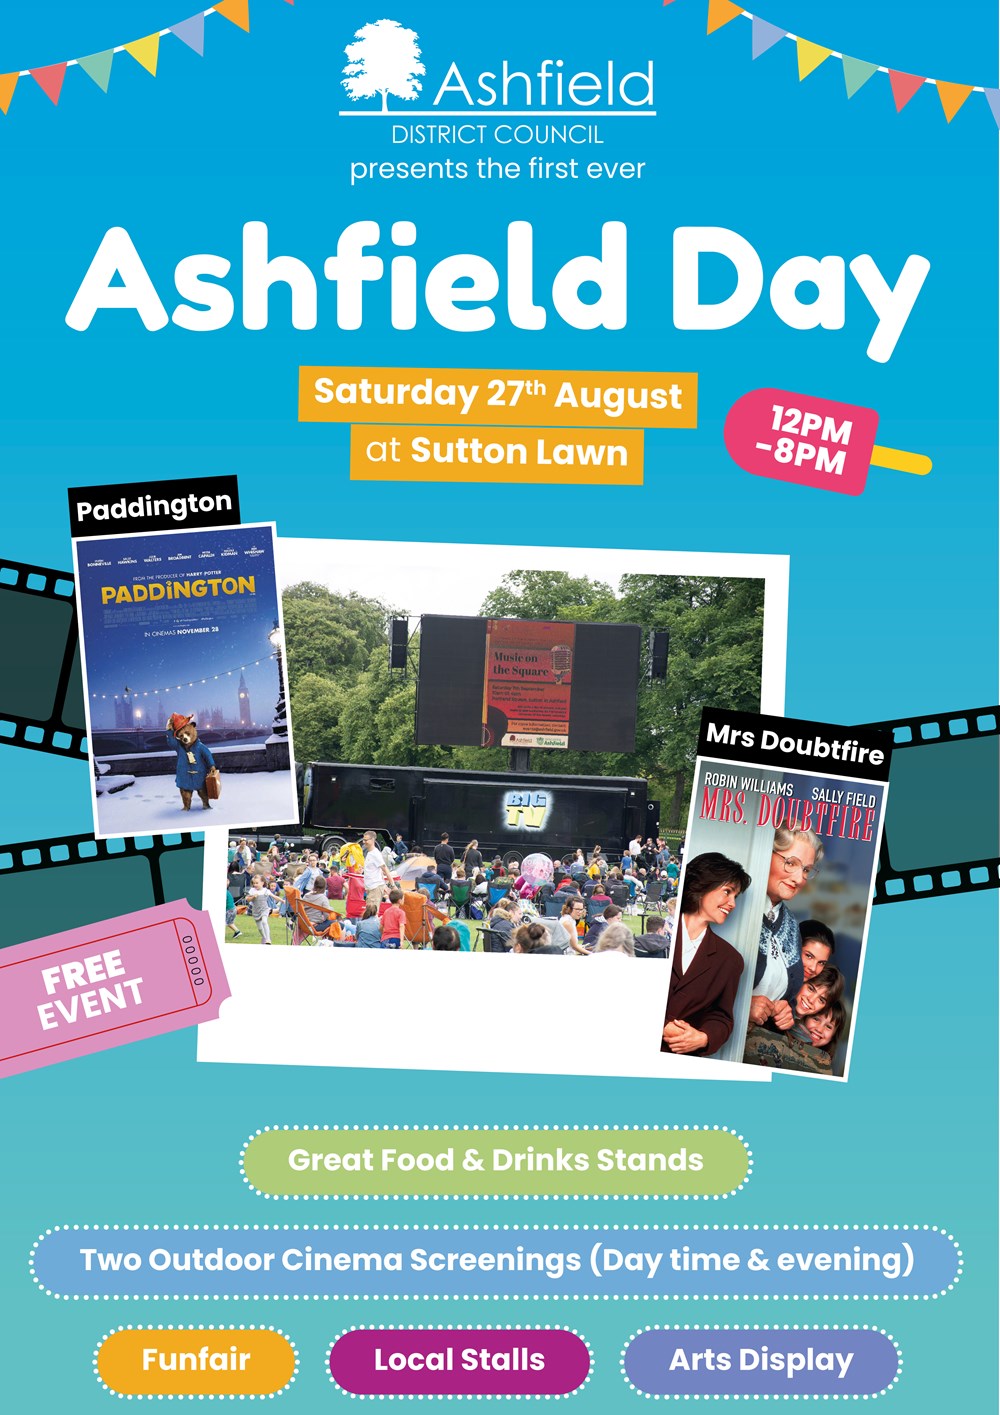 Ashfield District Council presents the first ever Ashfield Day at Sutton Lawn on Saturday 27 August